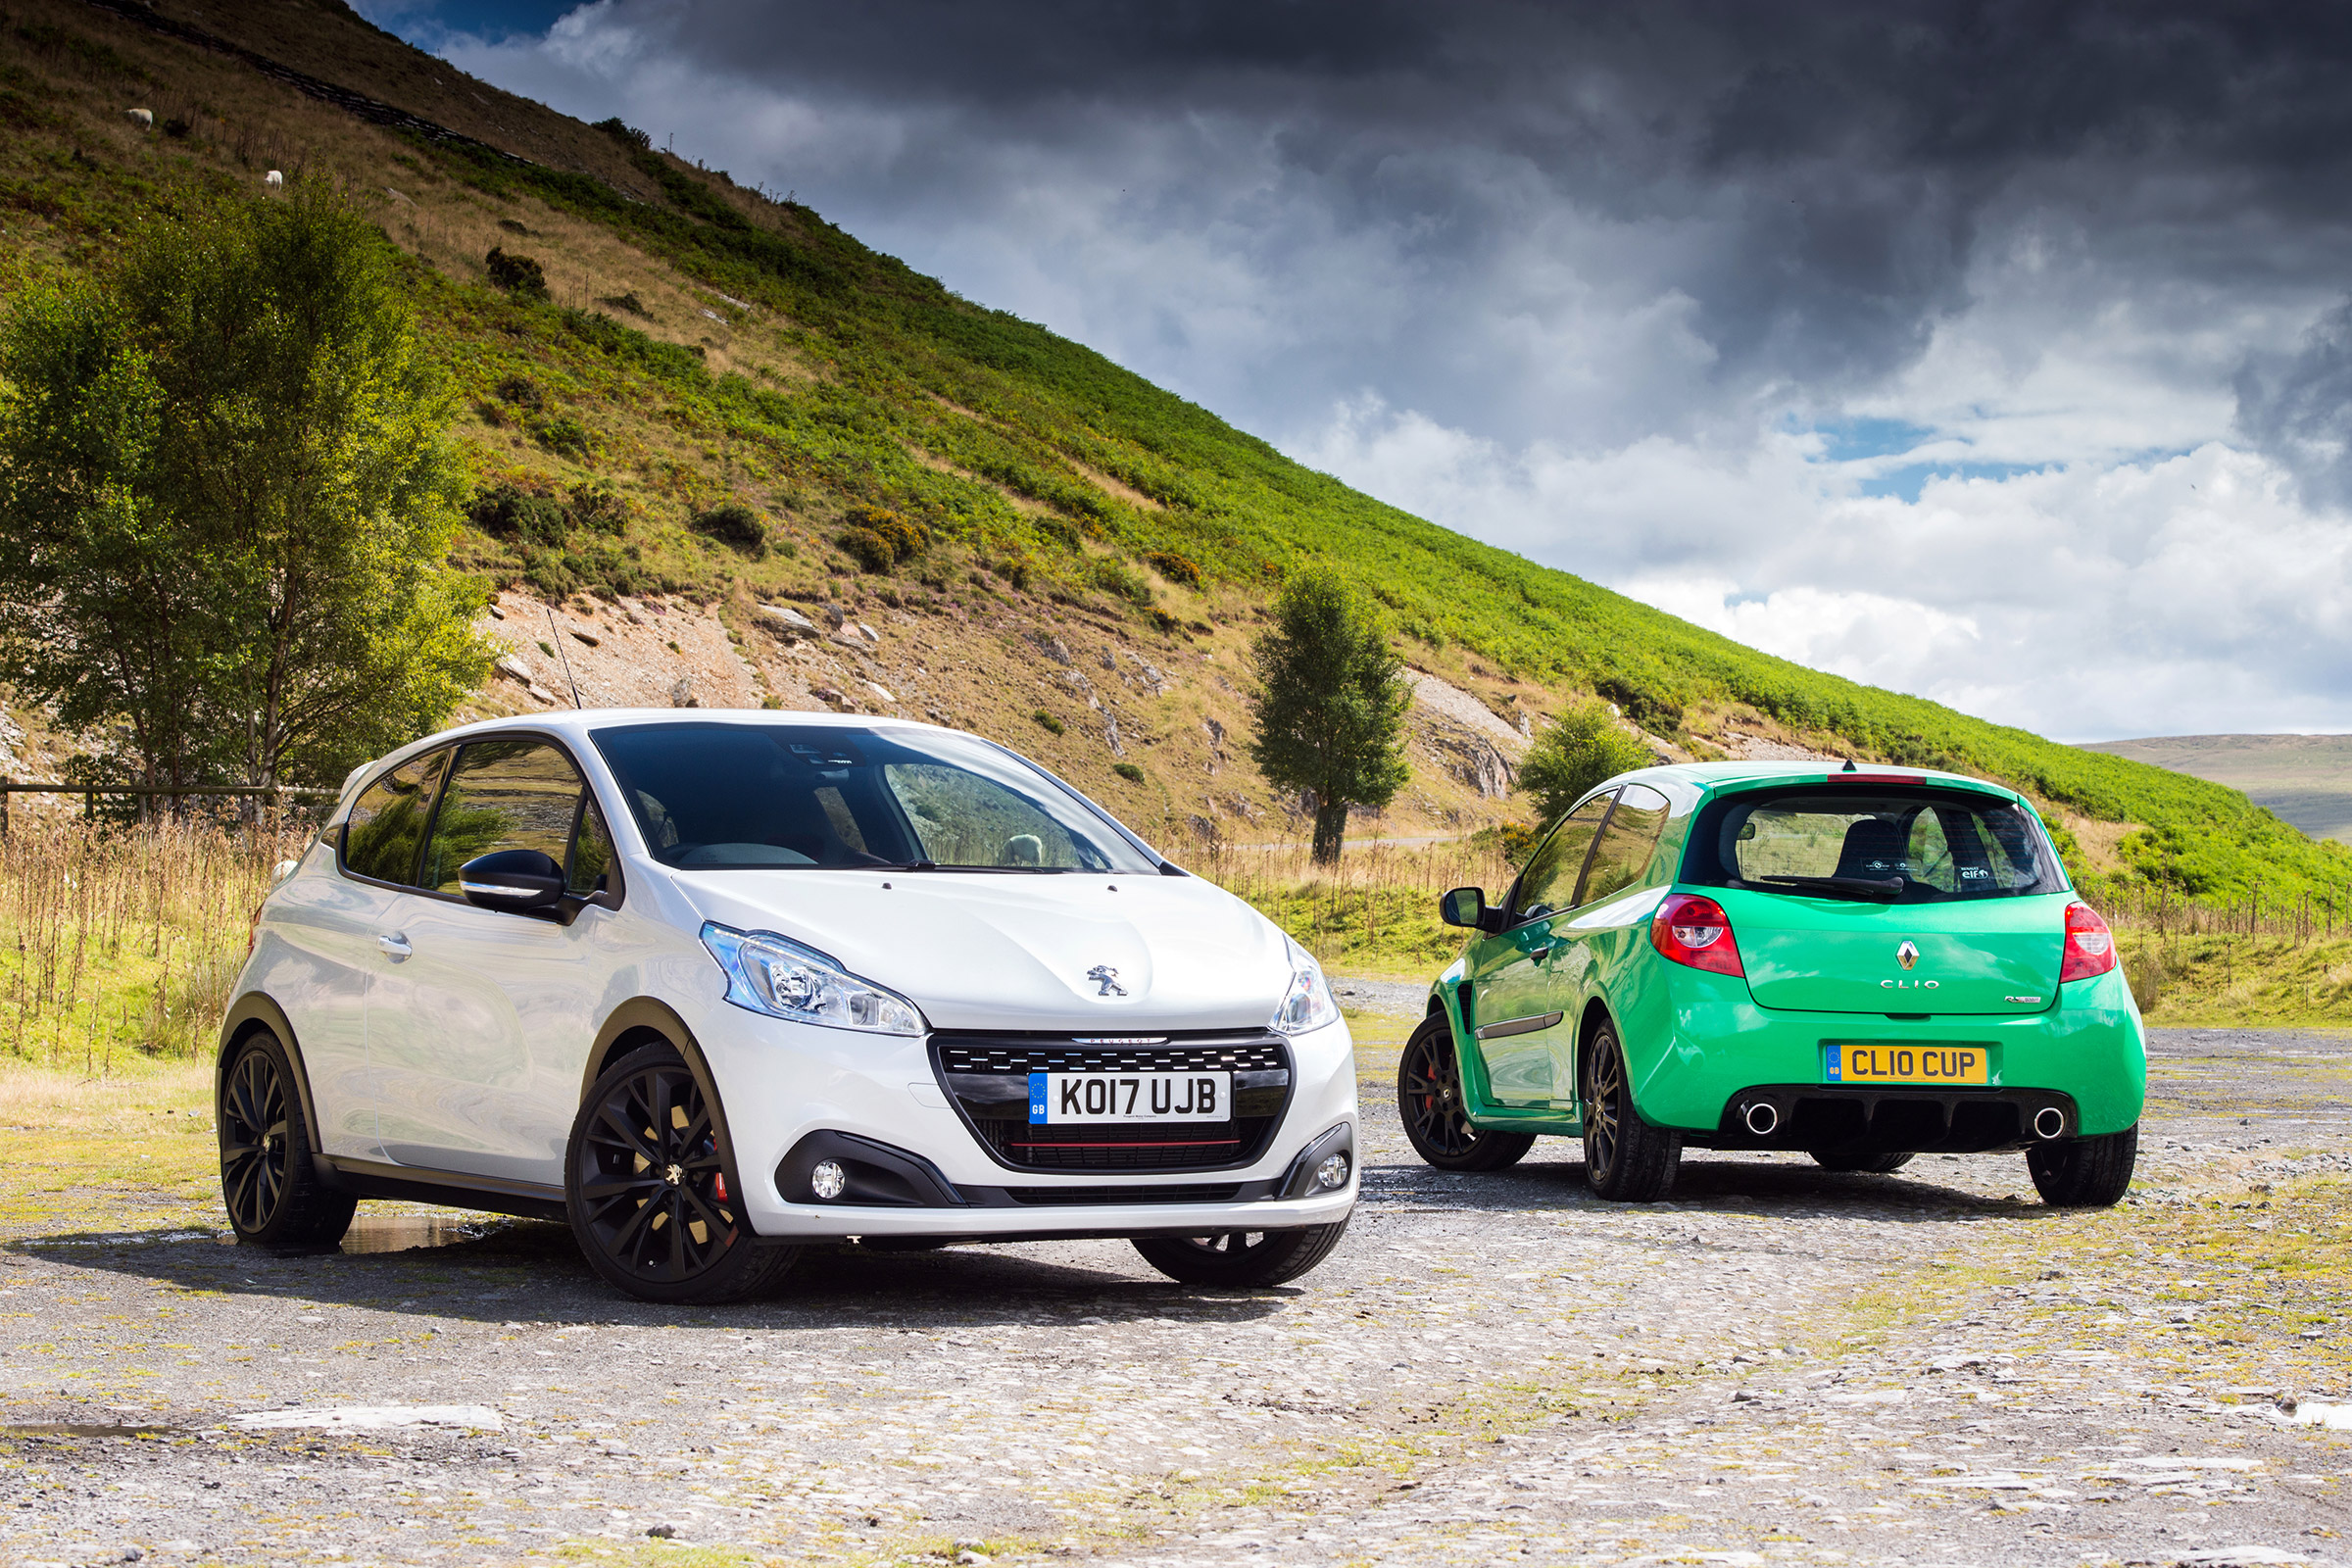 Peugeot 8 Gti And Gti By Peugeot Sport Review Prices Specs And 0 60 Time Evo